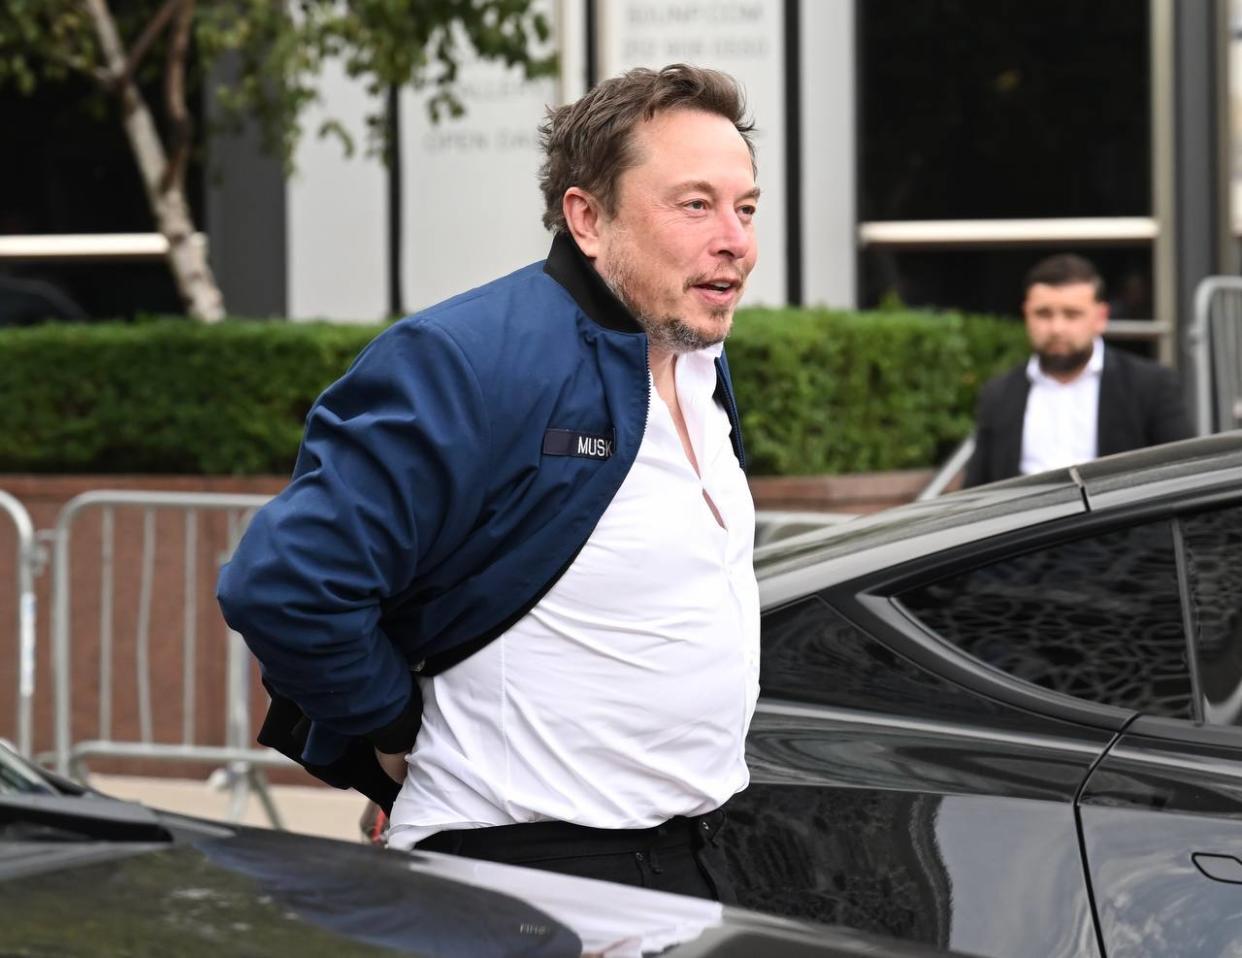 NEW YORK, US - SEPTEMBER 17: Elon Musk arrives at the Turkish House to meet with Turkish President Recep Tayyip Erdogan ahead of the 78th session of the United Nations (UN) General Assembly in New York, United States on September 17, 2023. 